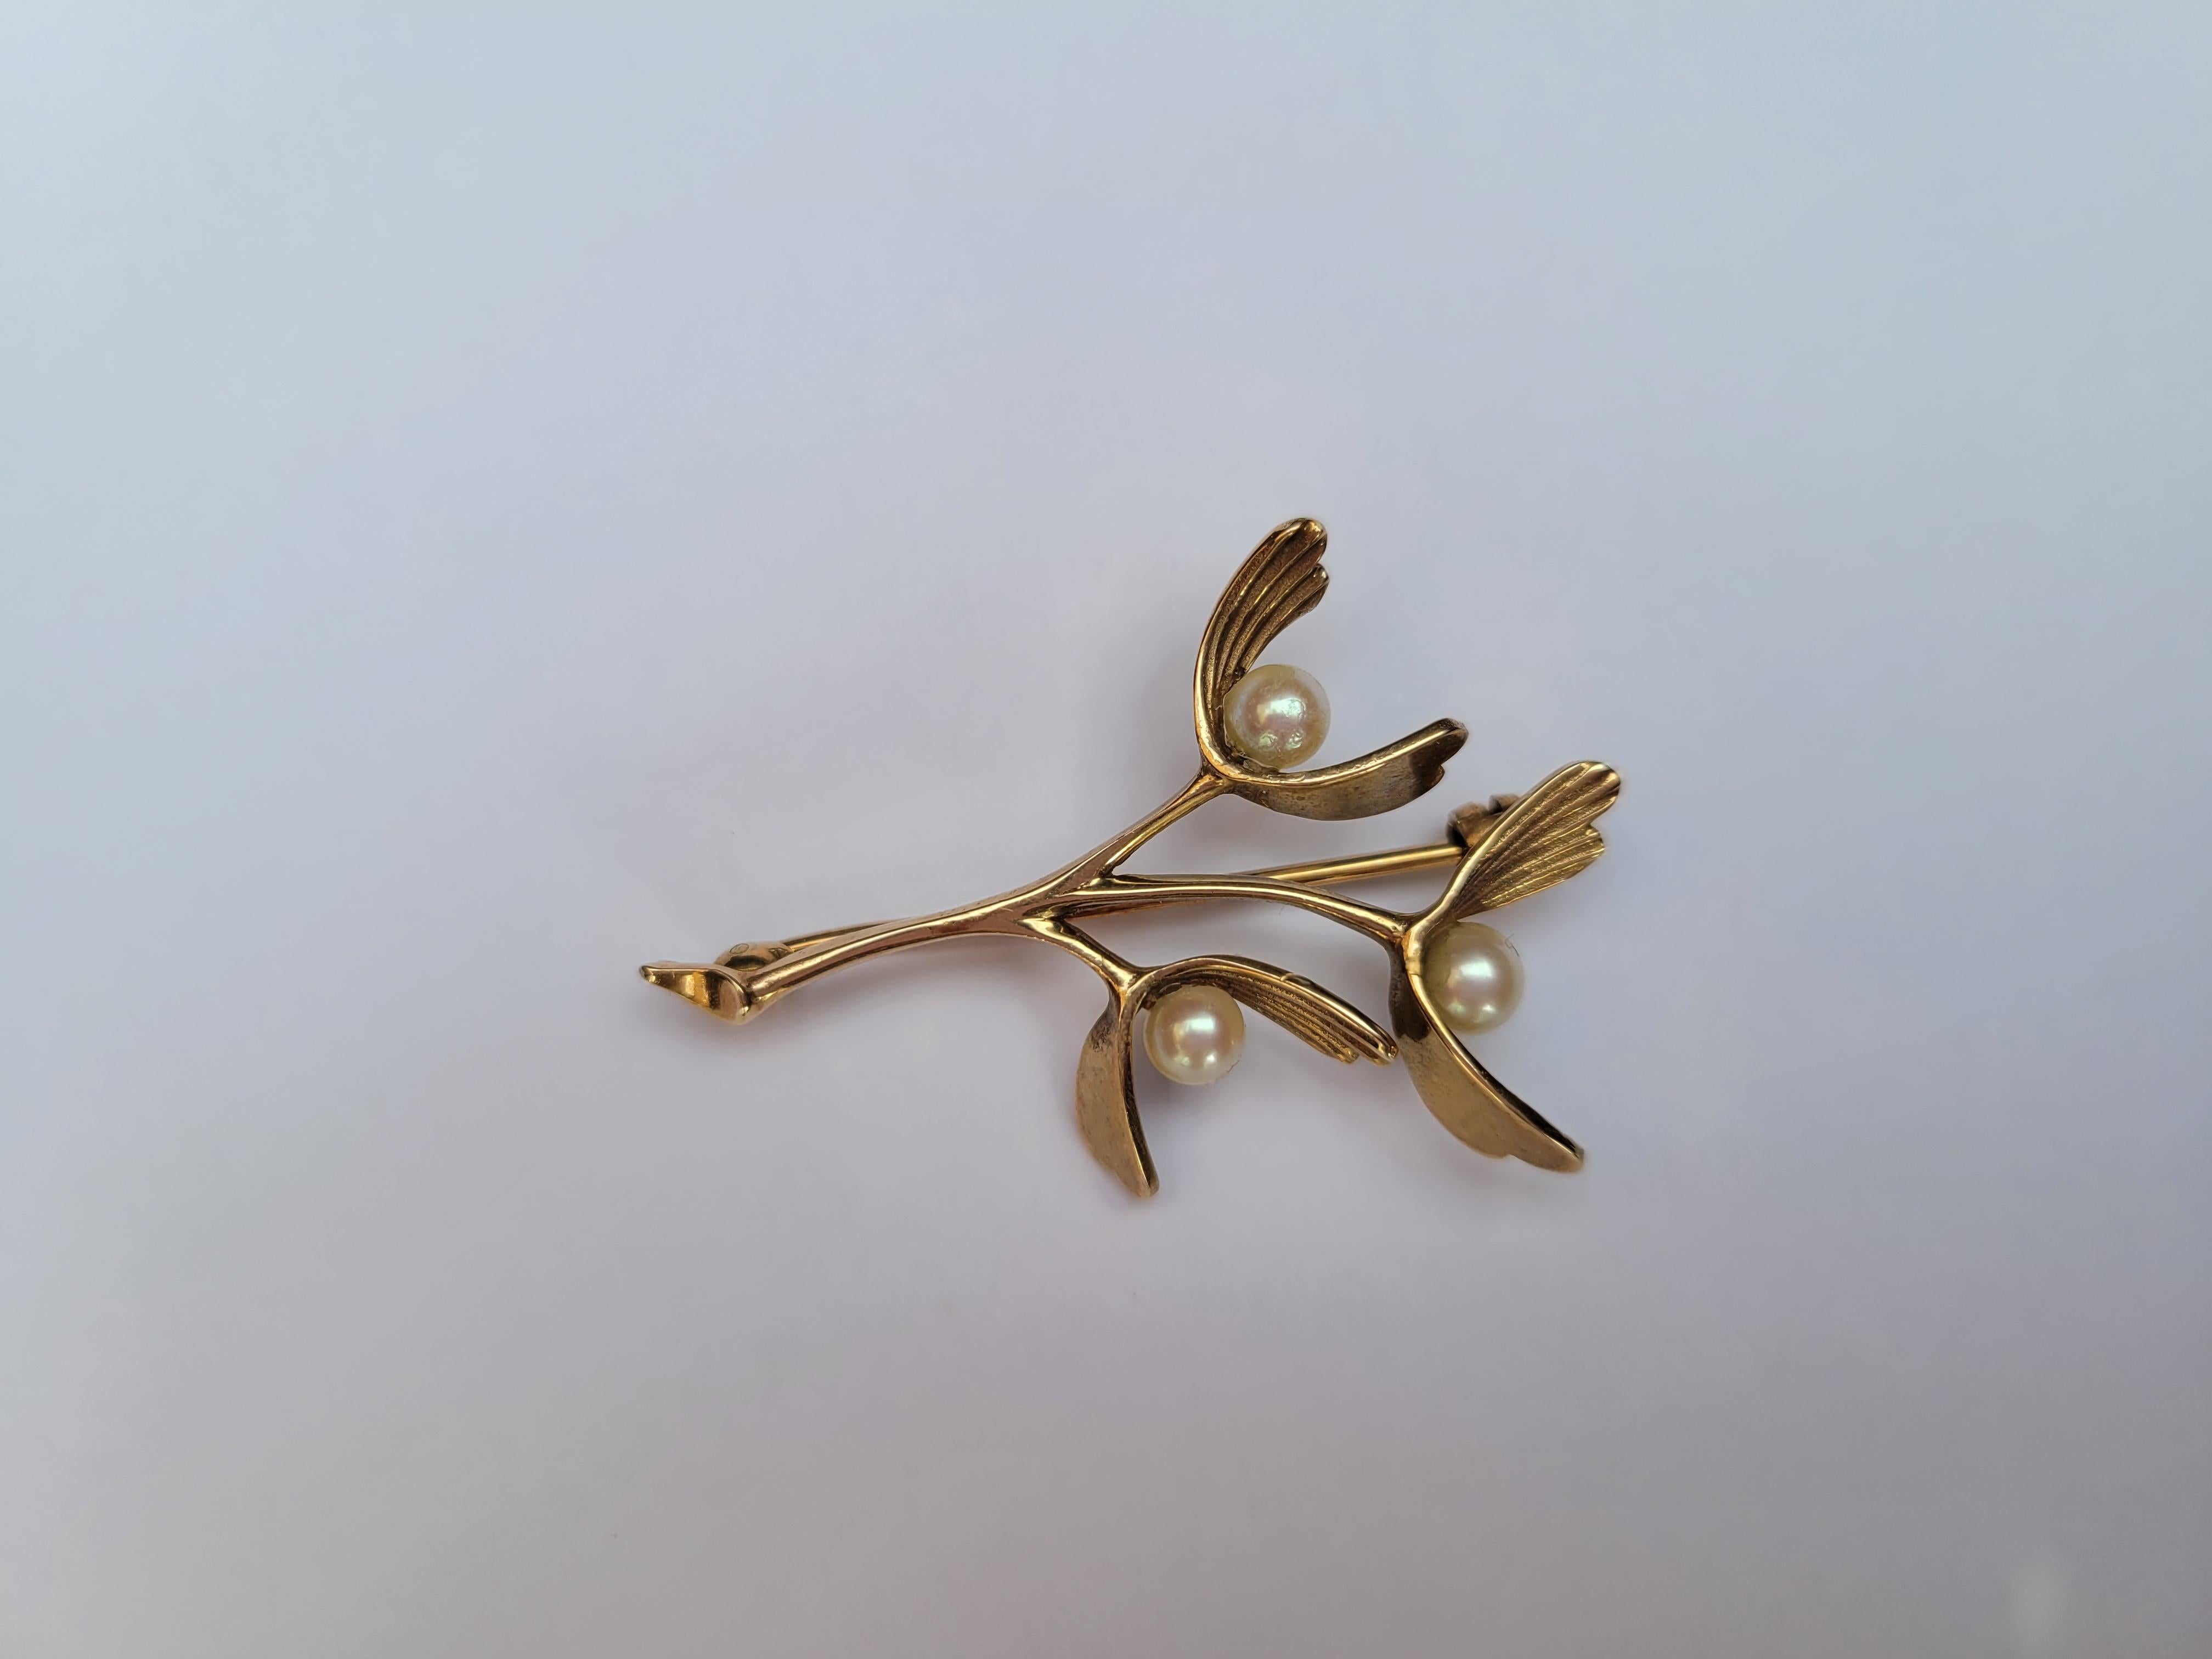 A lovely Vintage c.1960 9 Carat Gold and Cultured Pearl brooch in the form of a Mistletoe. Perfect as a gift. English origin.

Mistletoe represents romance, fertility, and vitality.

Length 43mm.
Width 30mm.
Weight 4.1gr.
Fully hallmarked for 9